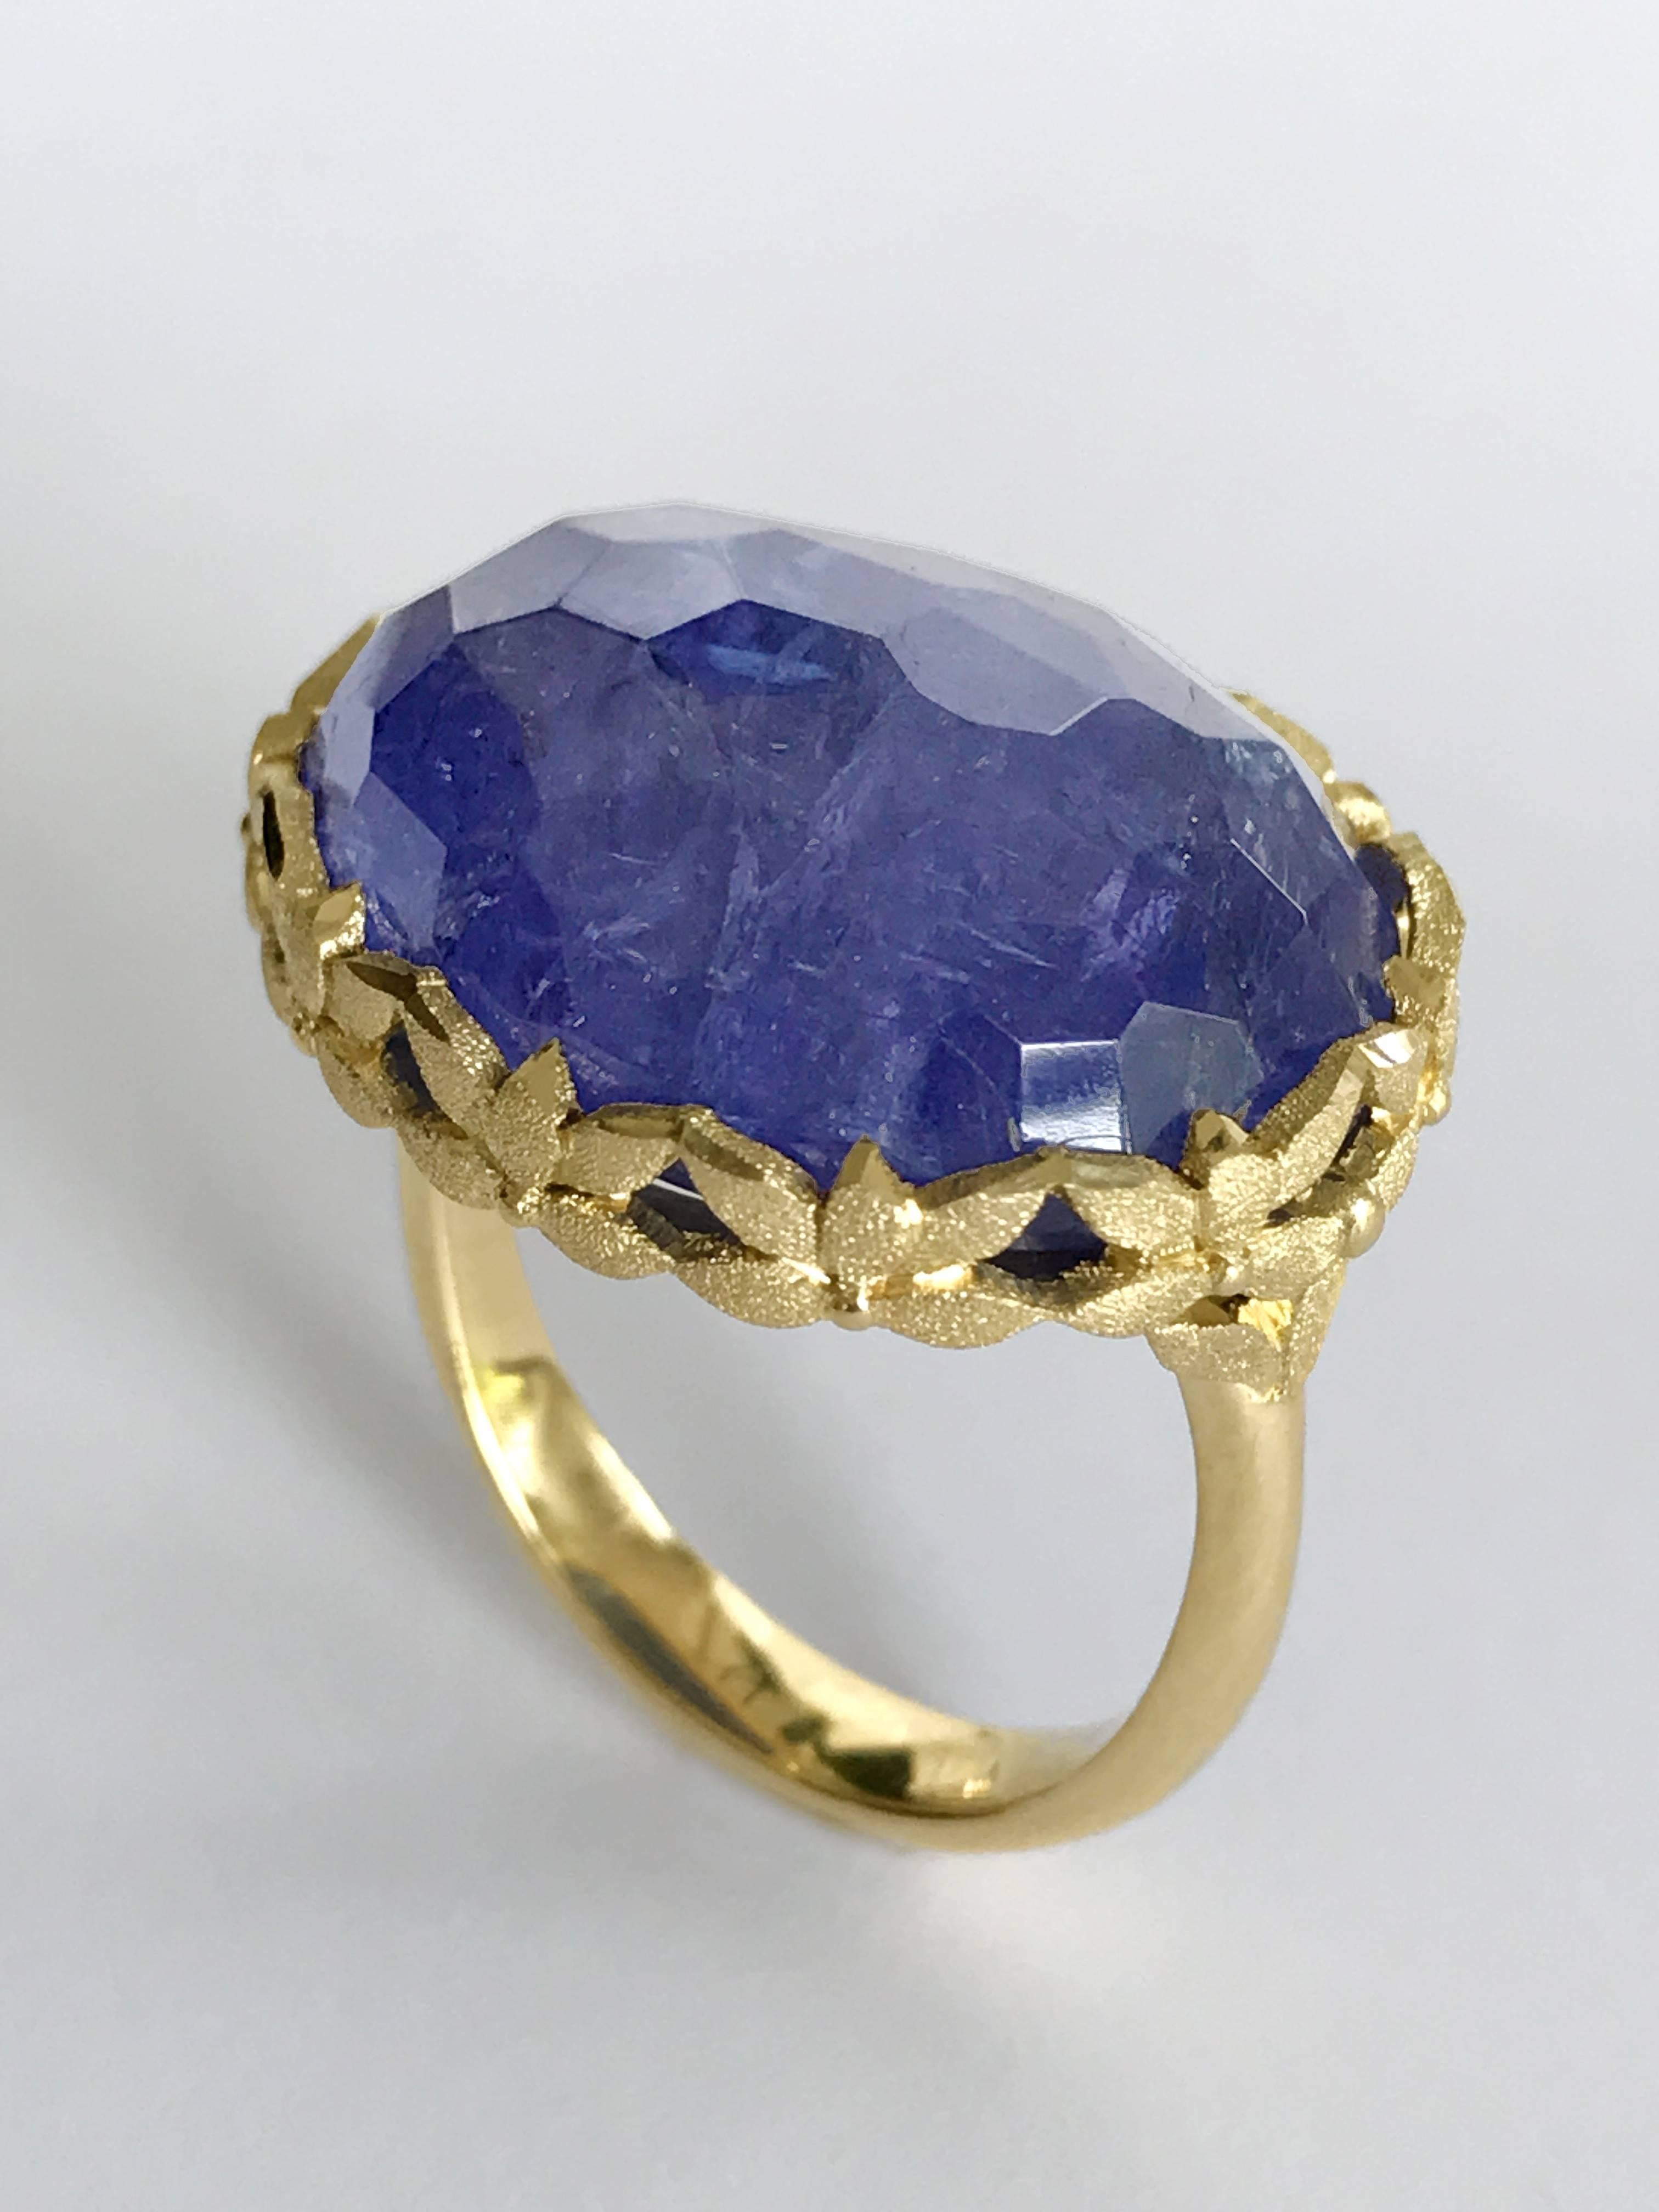 Dalben design 18 kt engraved yellow gold Cocktail Ring with an Oval faceted cut Tanzanite weighting 23,85 carat .  Ring size 6 3/4 USA - 54 EU resizable to most finger sizes.  
Bezel setting dimension: 
width 21,6 mm, 
height 17,9 mm.  
The Ring has